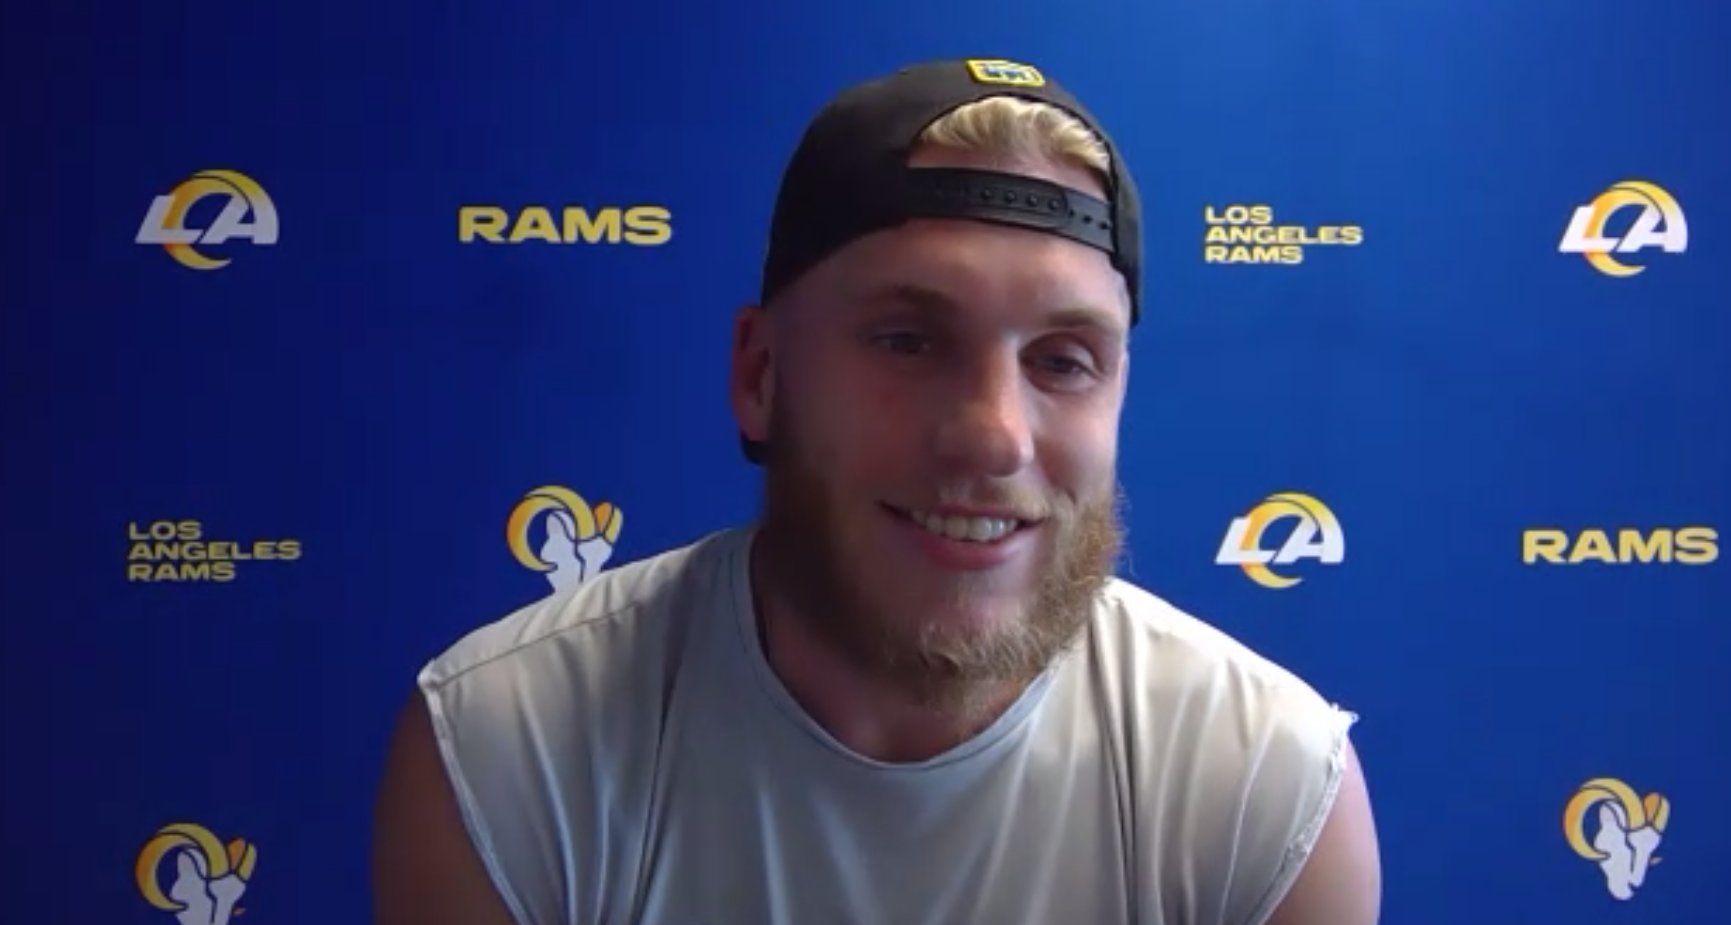 Greg Beacham on X: Rams WR Cooper Kupp is out at OTAs rocking a